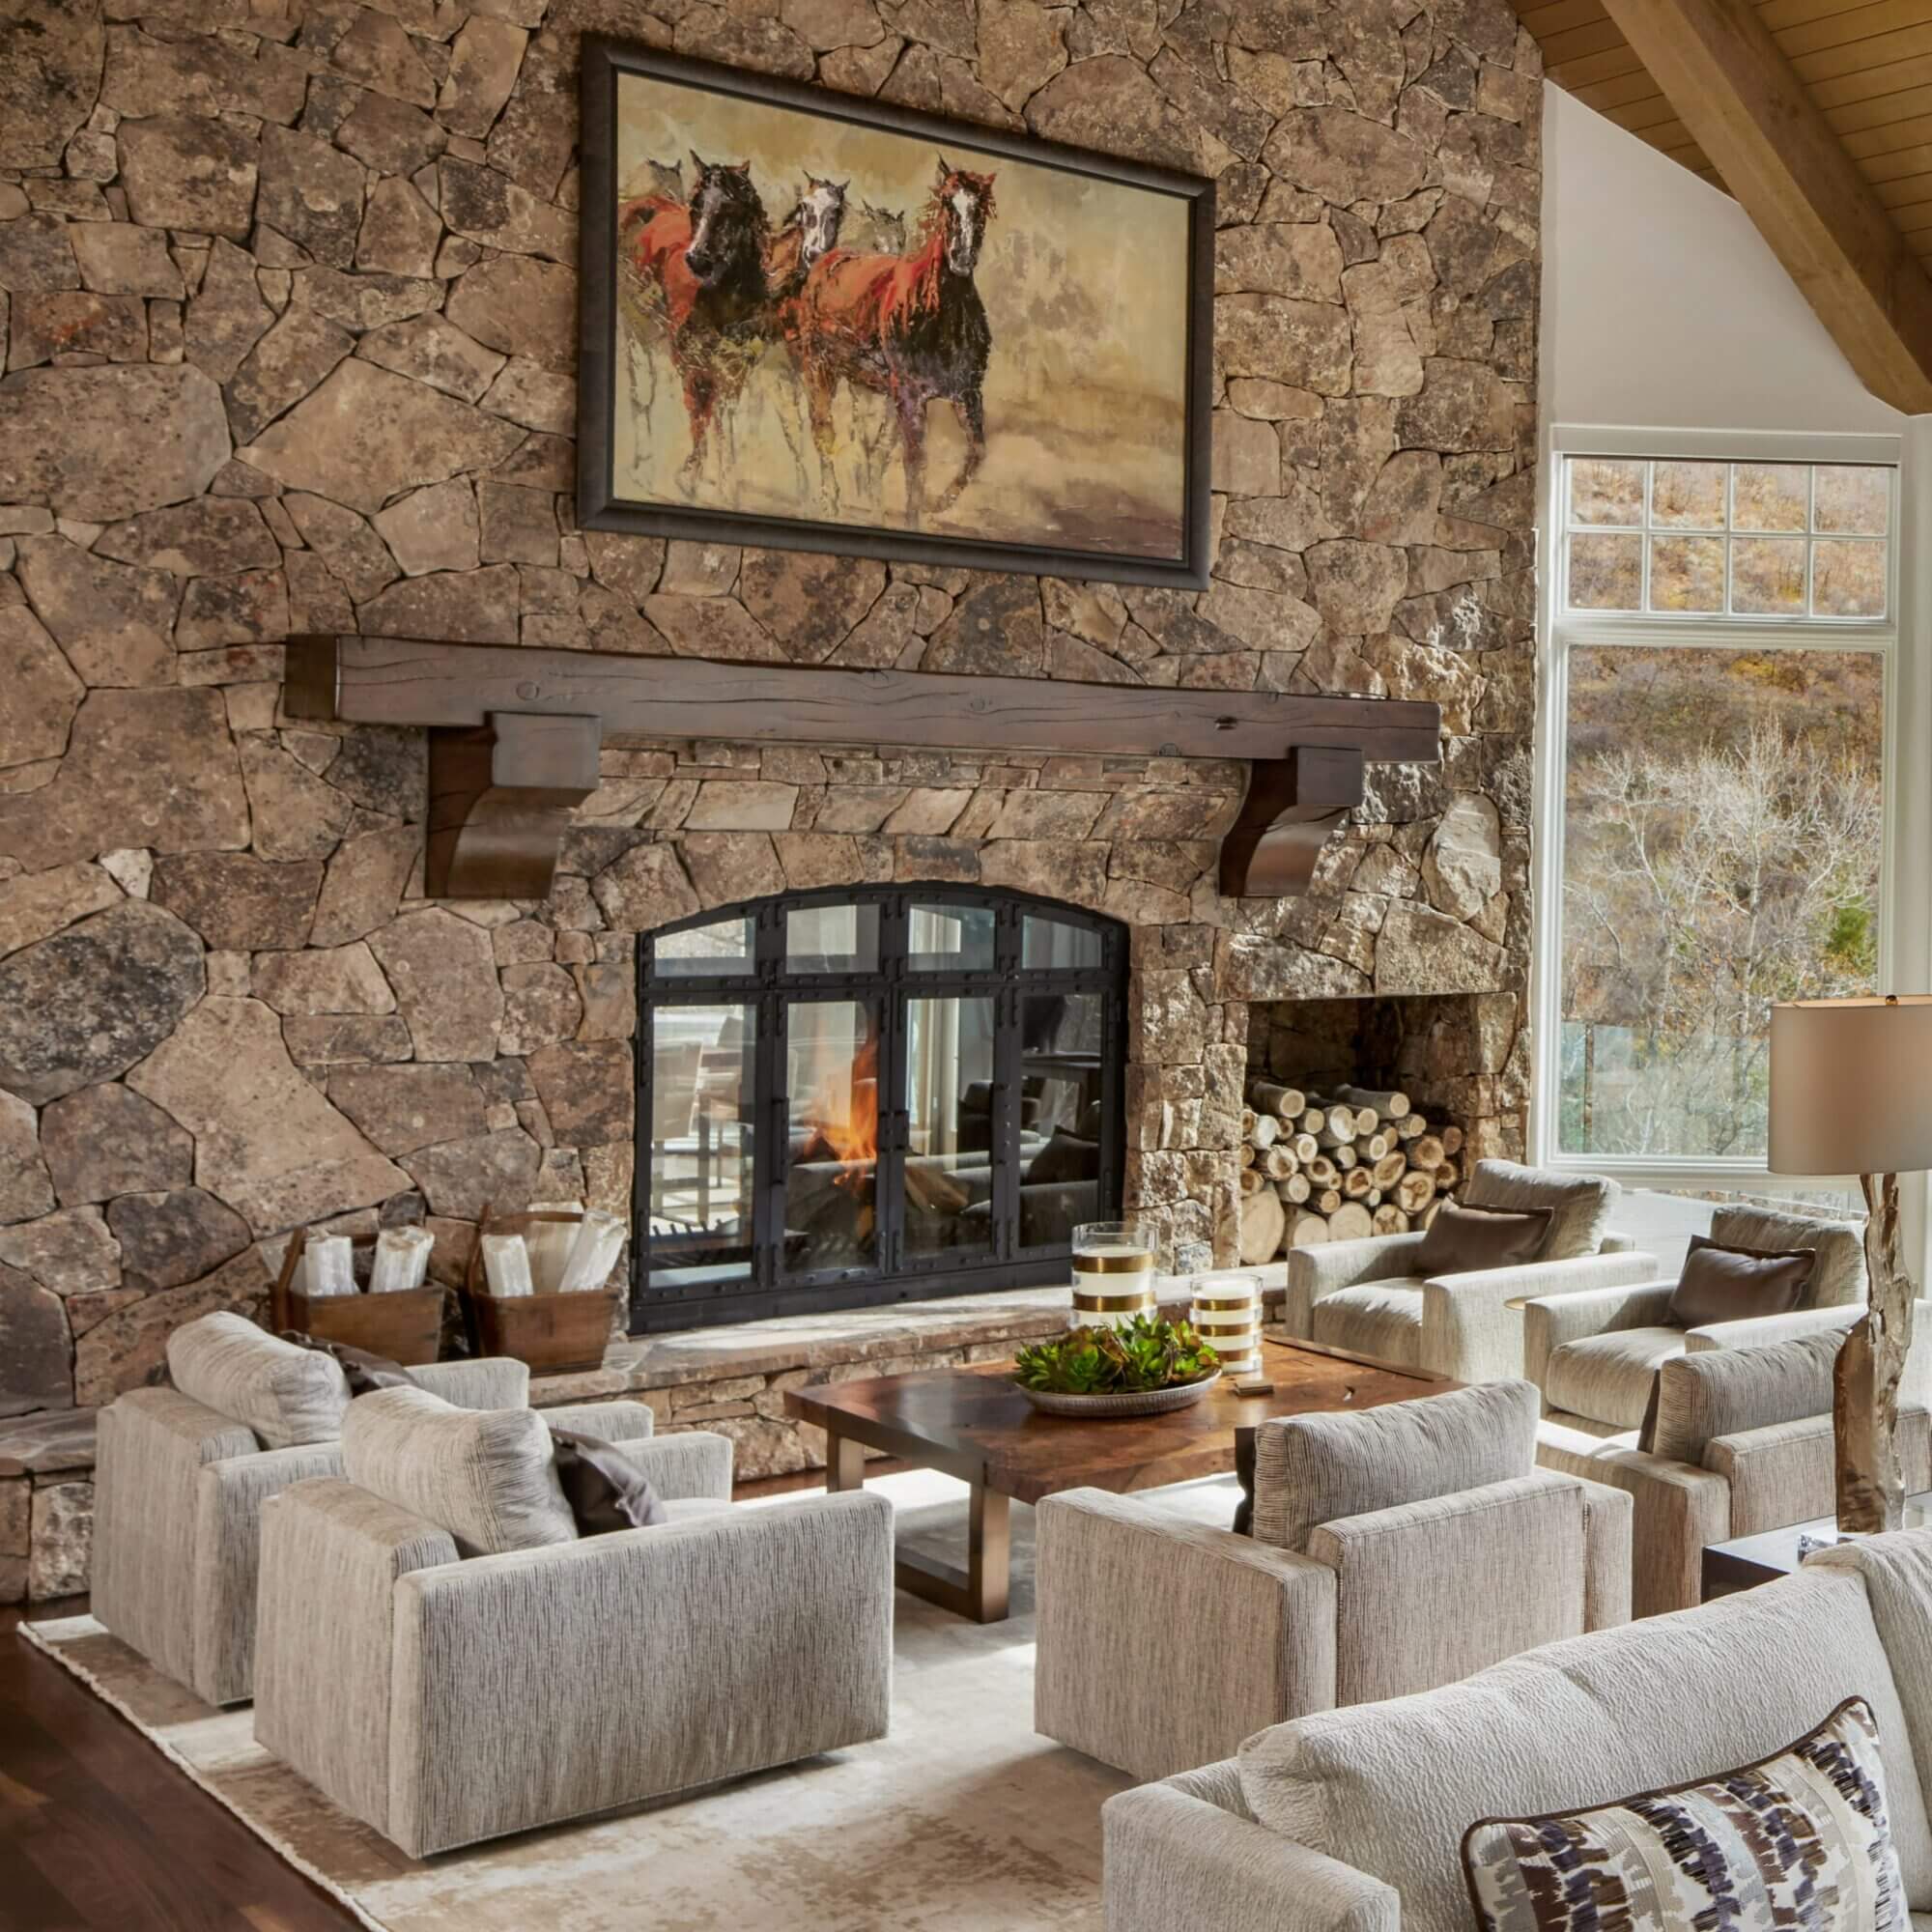 A living room with a stone fireplace and couches.